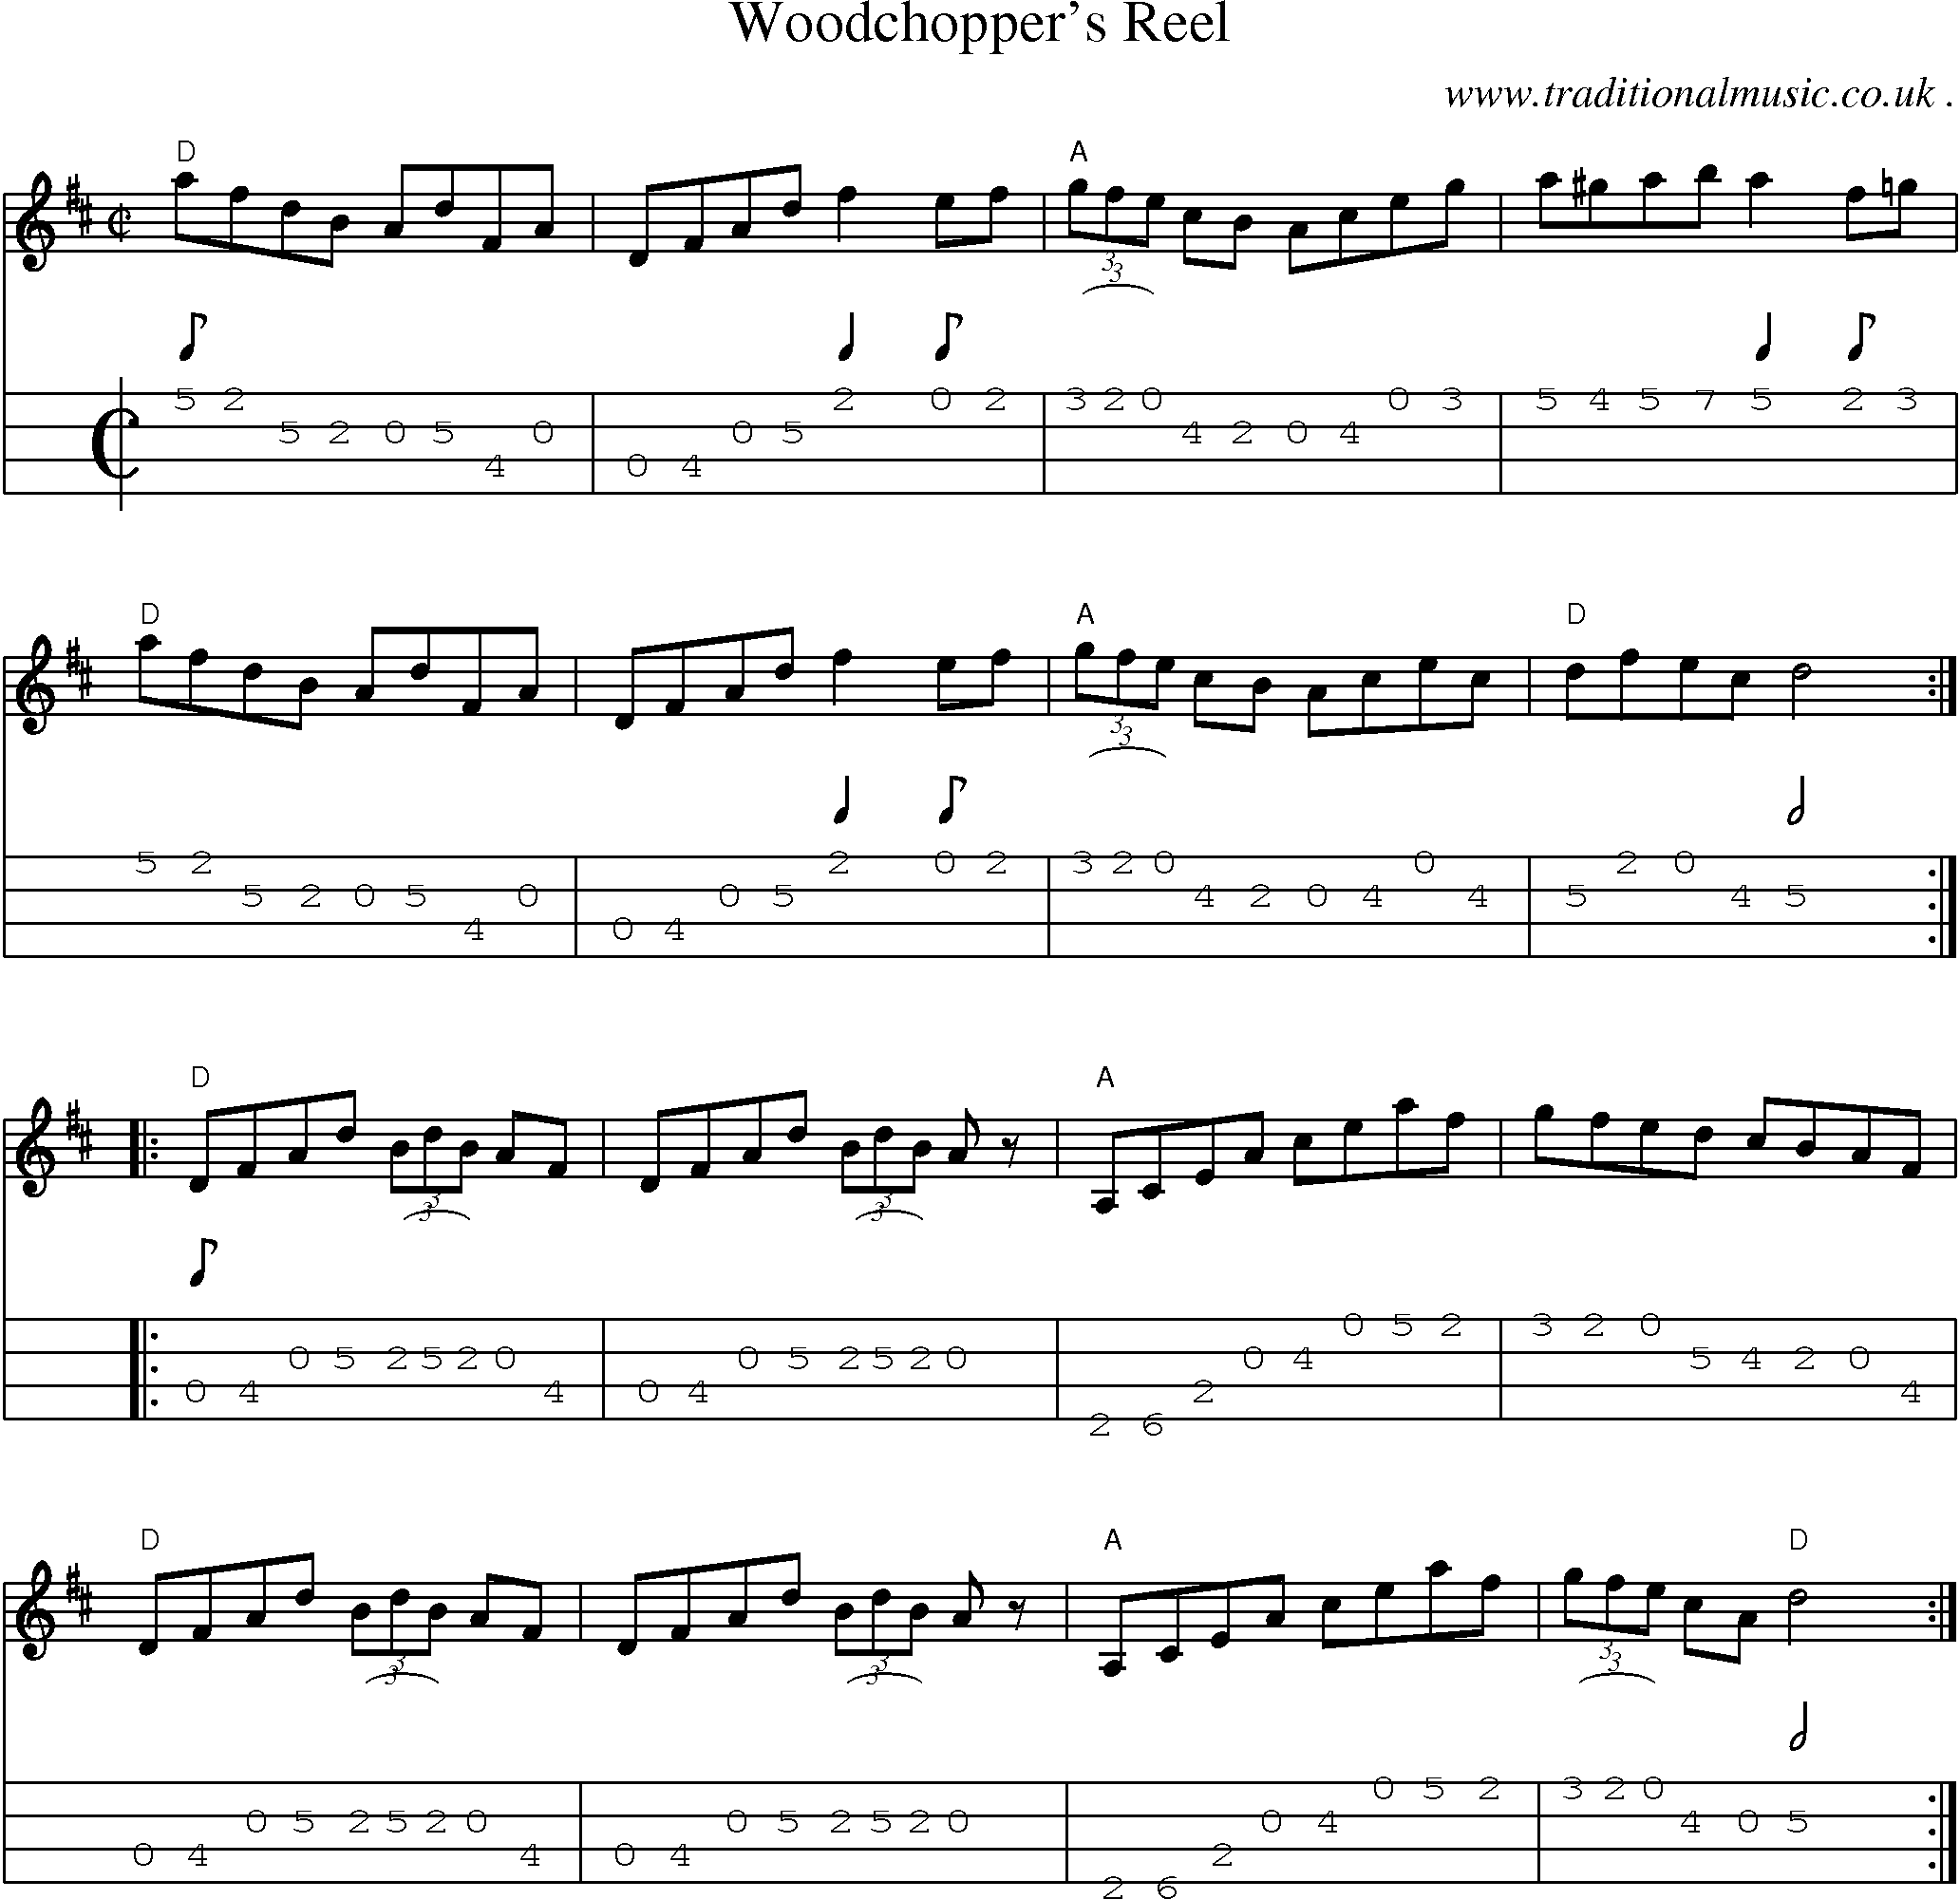 Sheet-music  score, Chords and Mandolin Tabs for Woodchoppers Reel